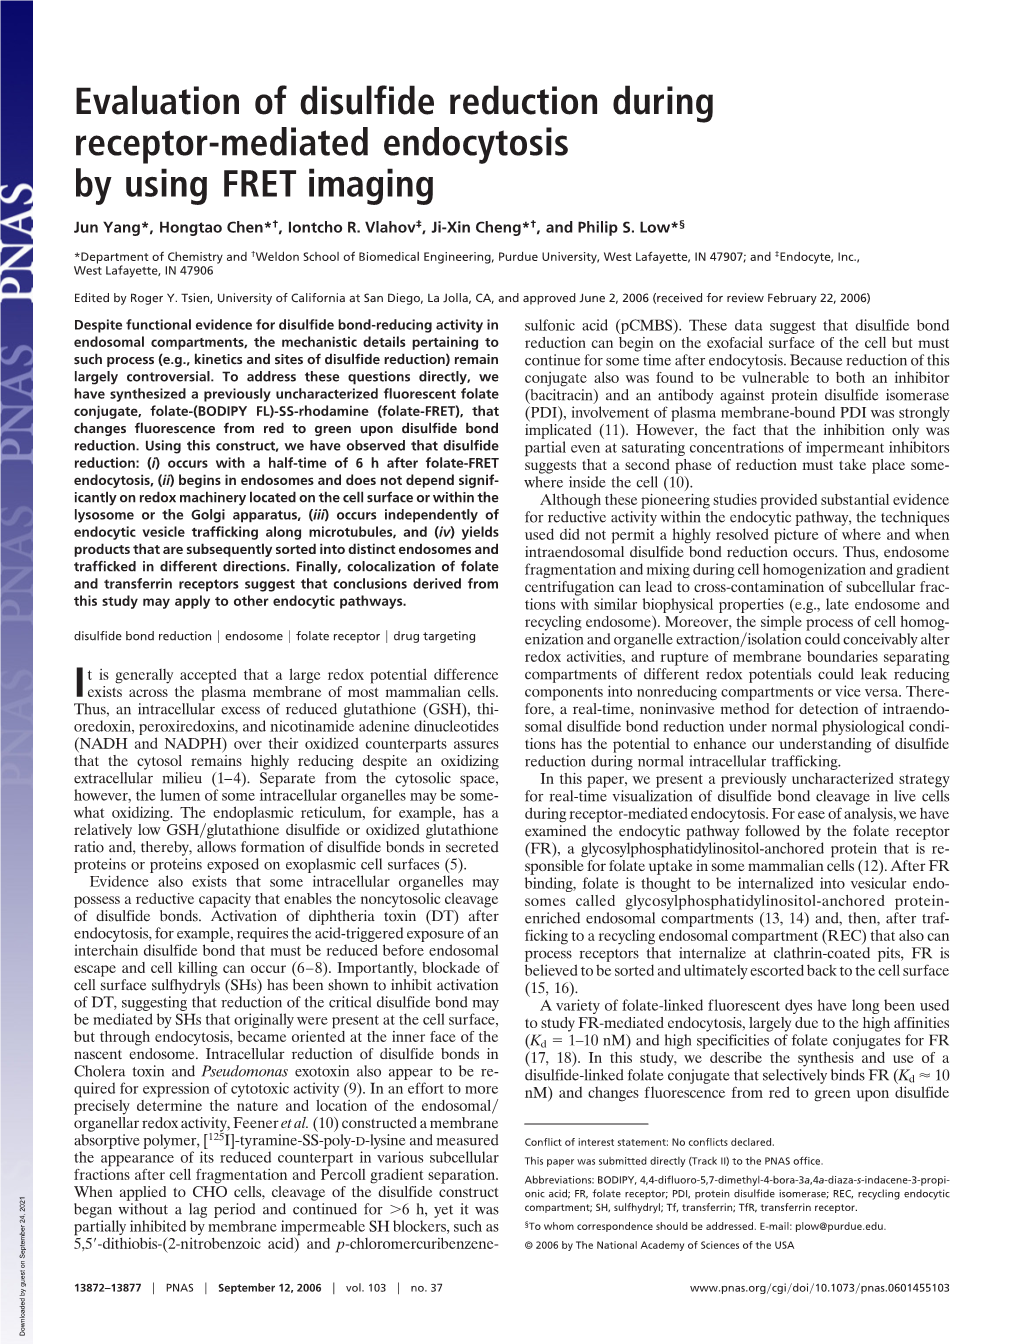 Evaluation of Disulfide Reduction During Receptor-Mediated Endocytosis by Using FRET Imaging